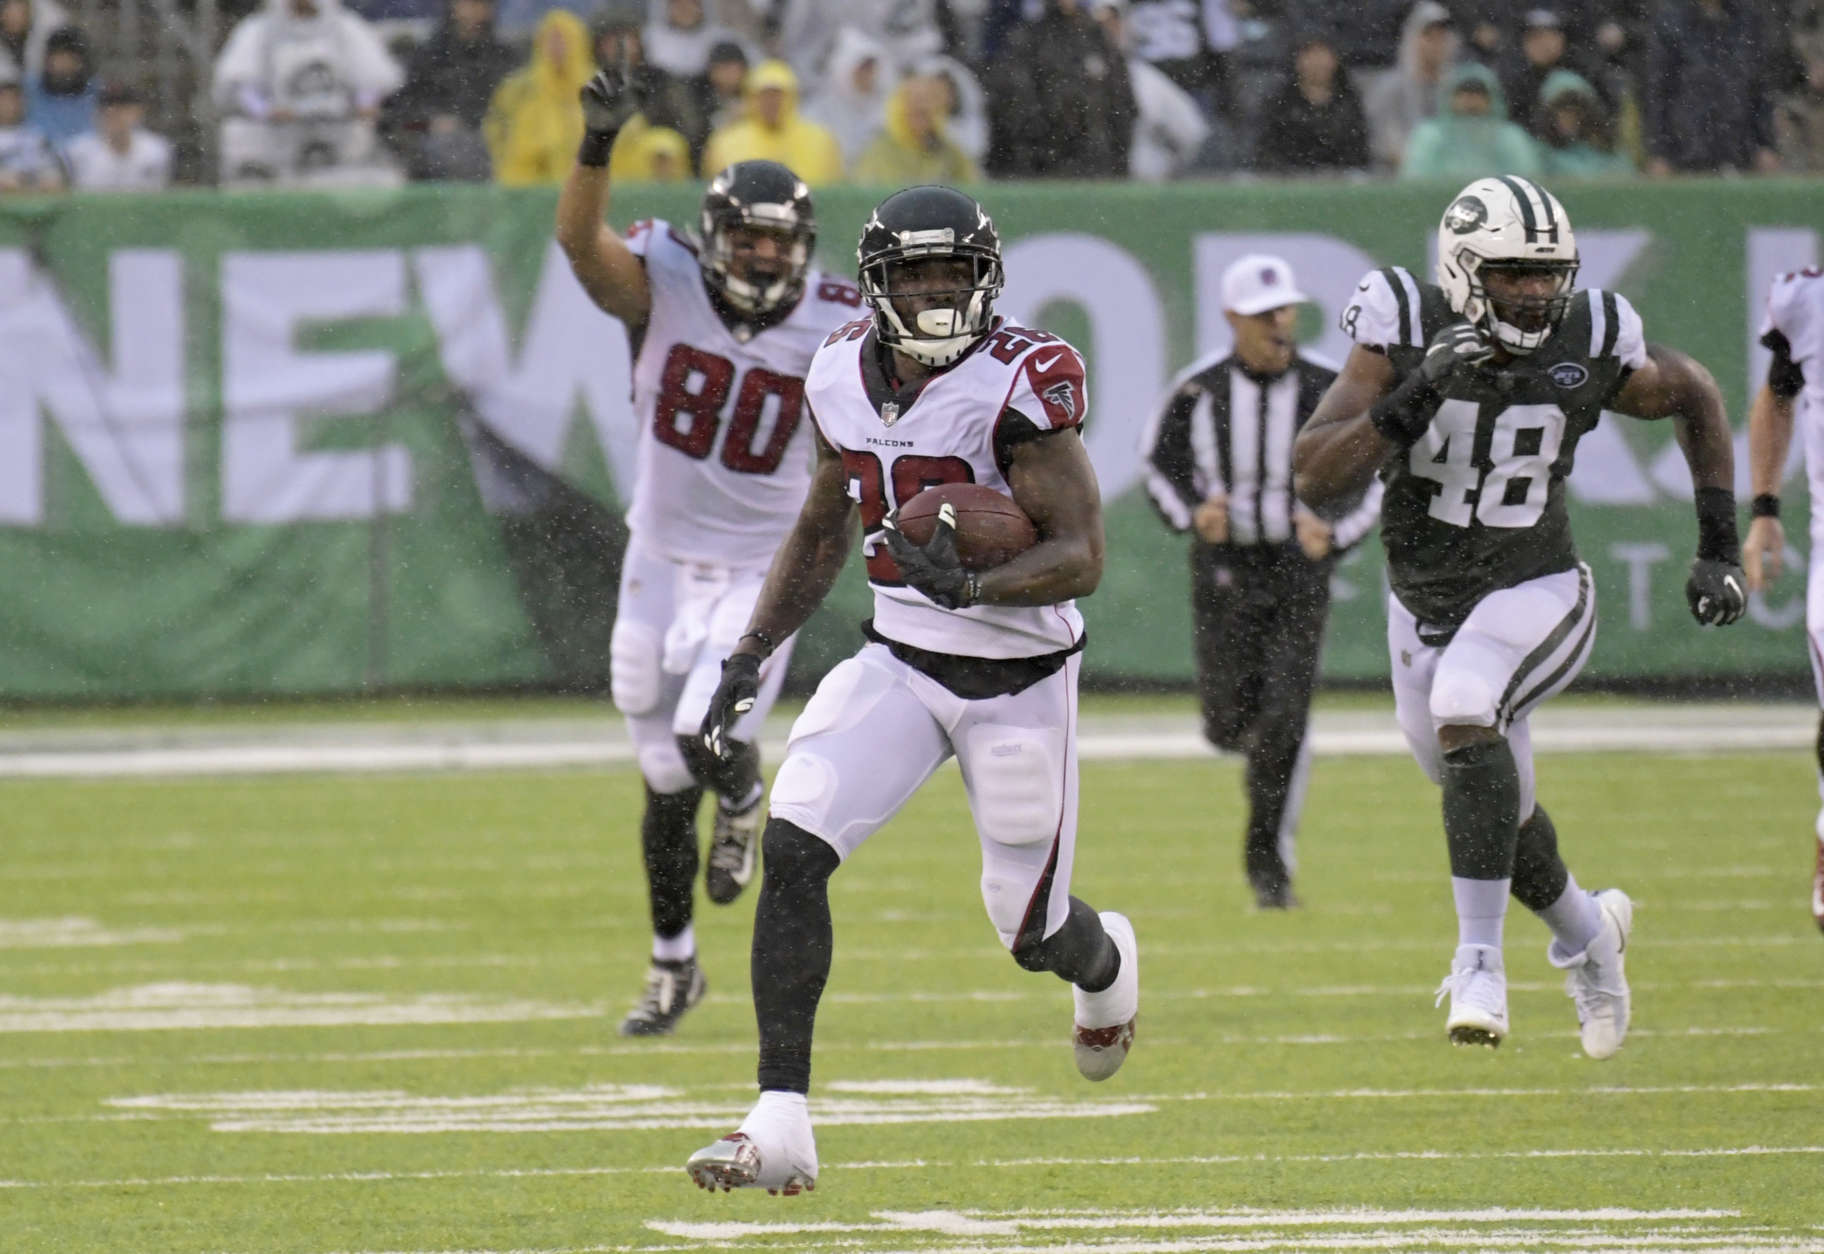 Atlanta Falcons running back Tevin Coleman (26) is pursued by New York Jets outside linebacker Jordan Jenkins (48) during the second half of an NFL football game against the New York Jets Sunday, Oct. 29, 2017, in East Rutherford, N.J. (AP Photo/Bill Kostroun)